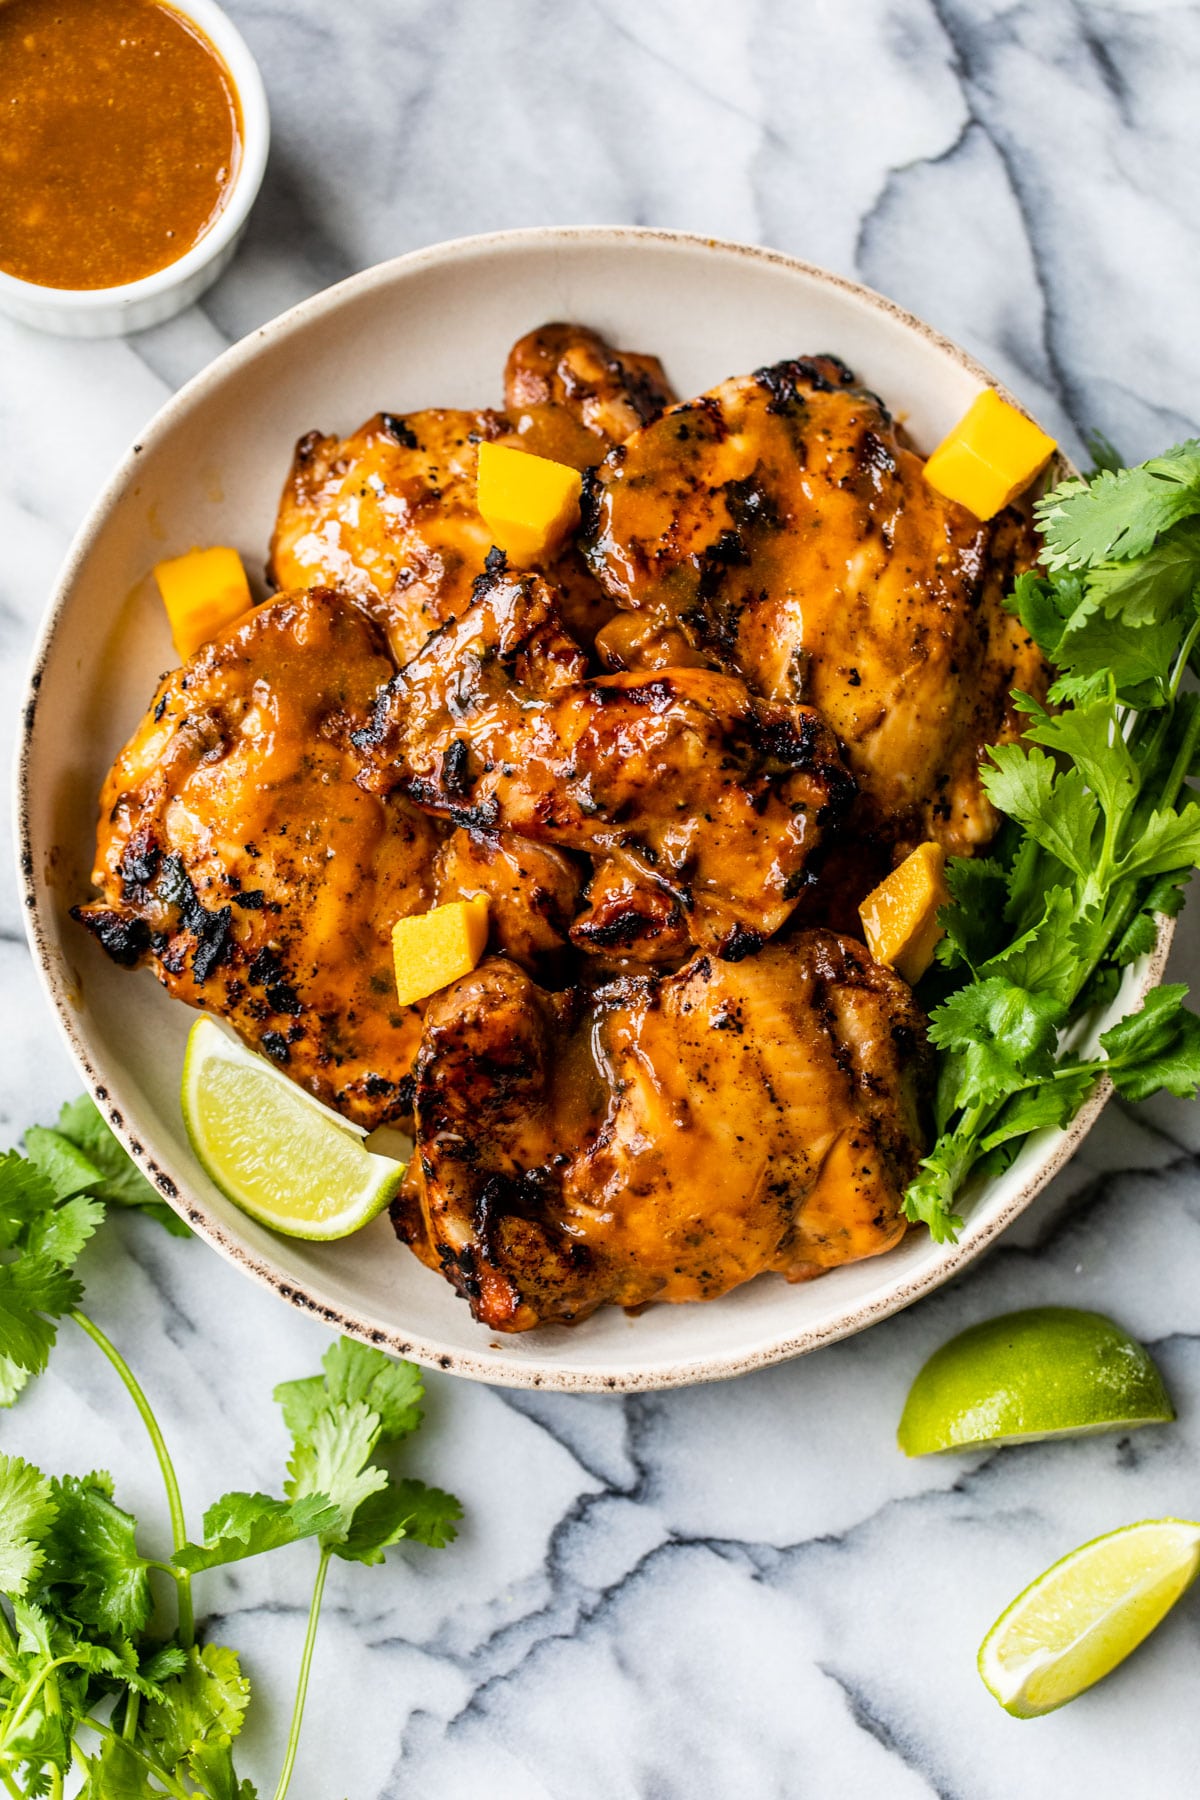 grilled chicken thighs coated in a mango marinade